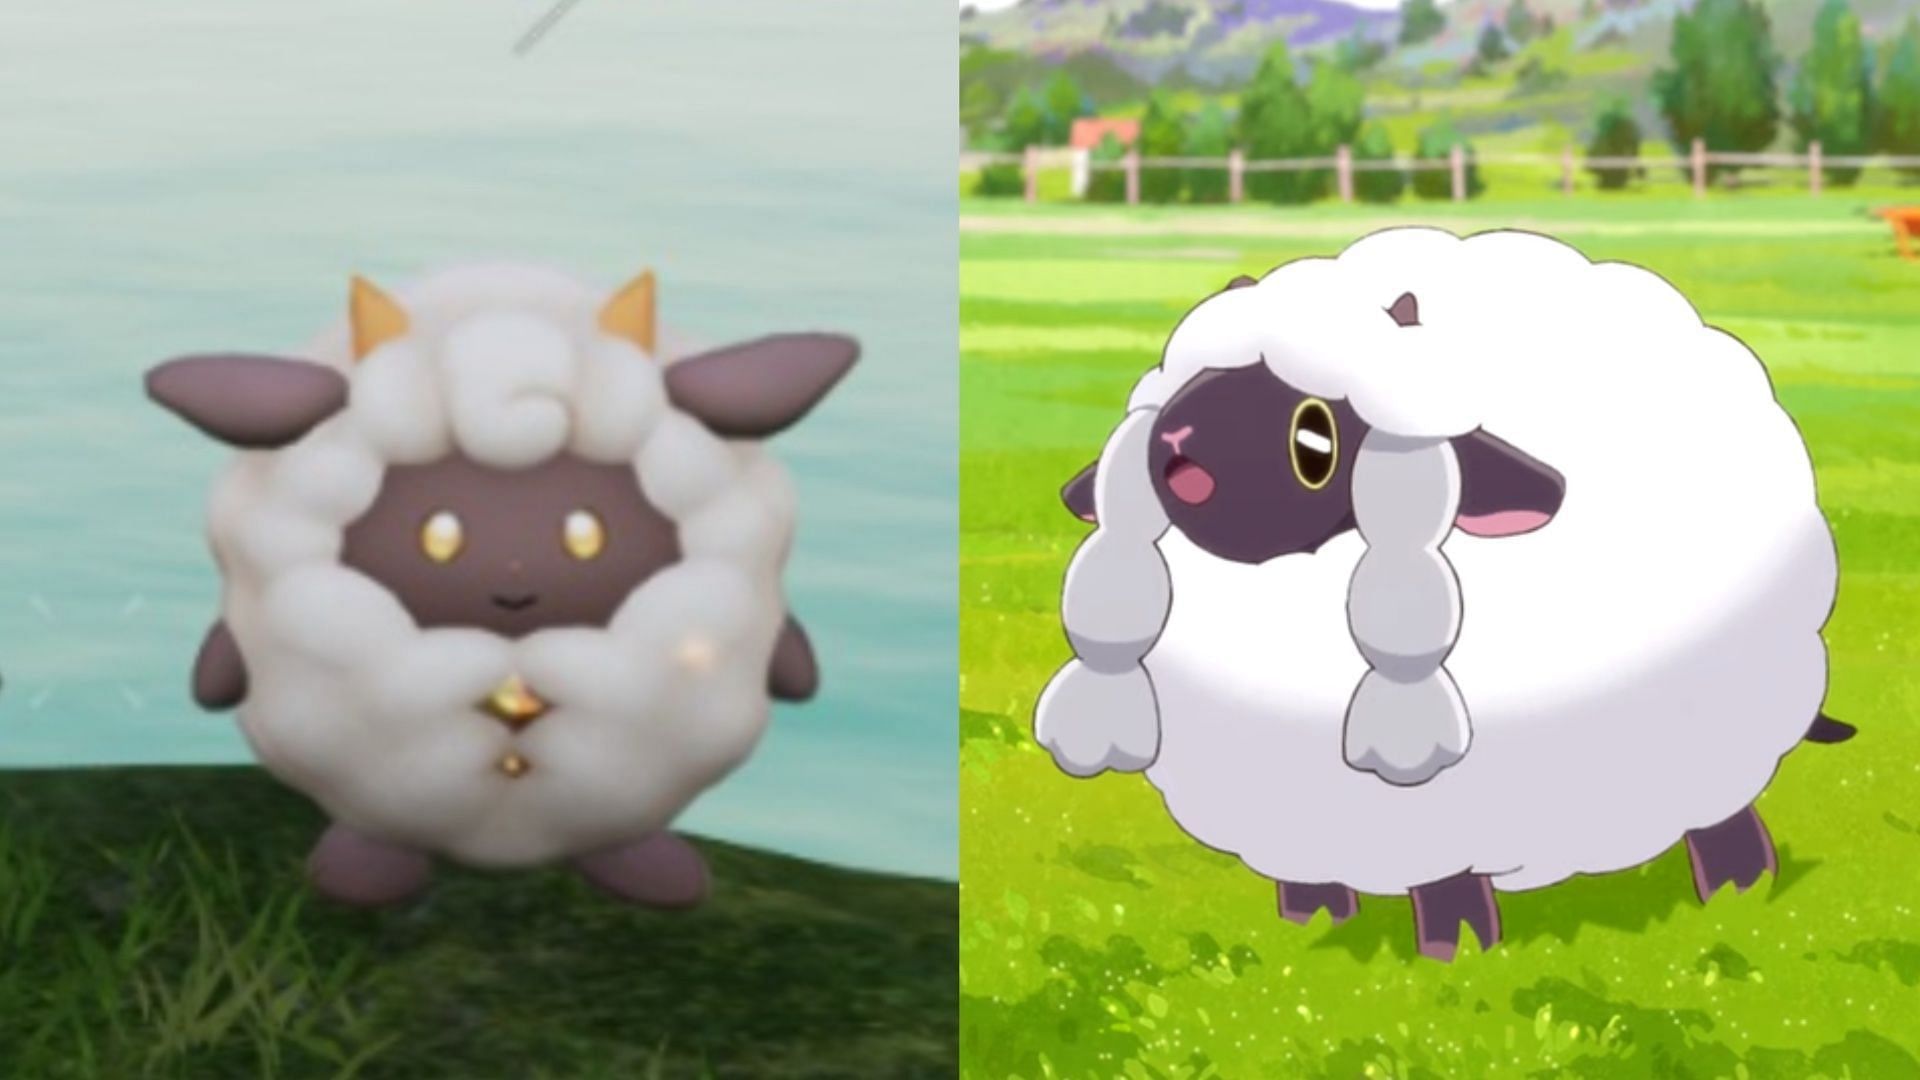 Lamball&#039;s Palworld Pal design coincides with Wooloo&#039;s from the Pokemon franchise (Image via Pocketpair/The Pokemon Company)